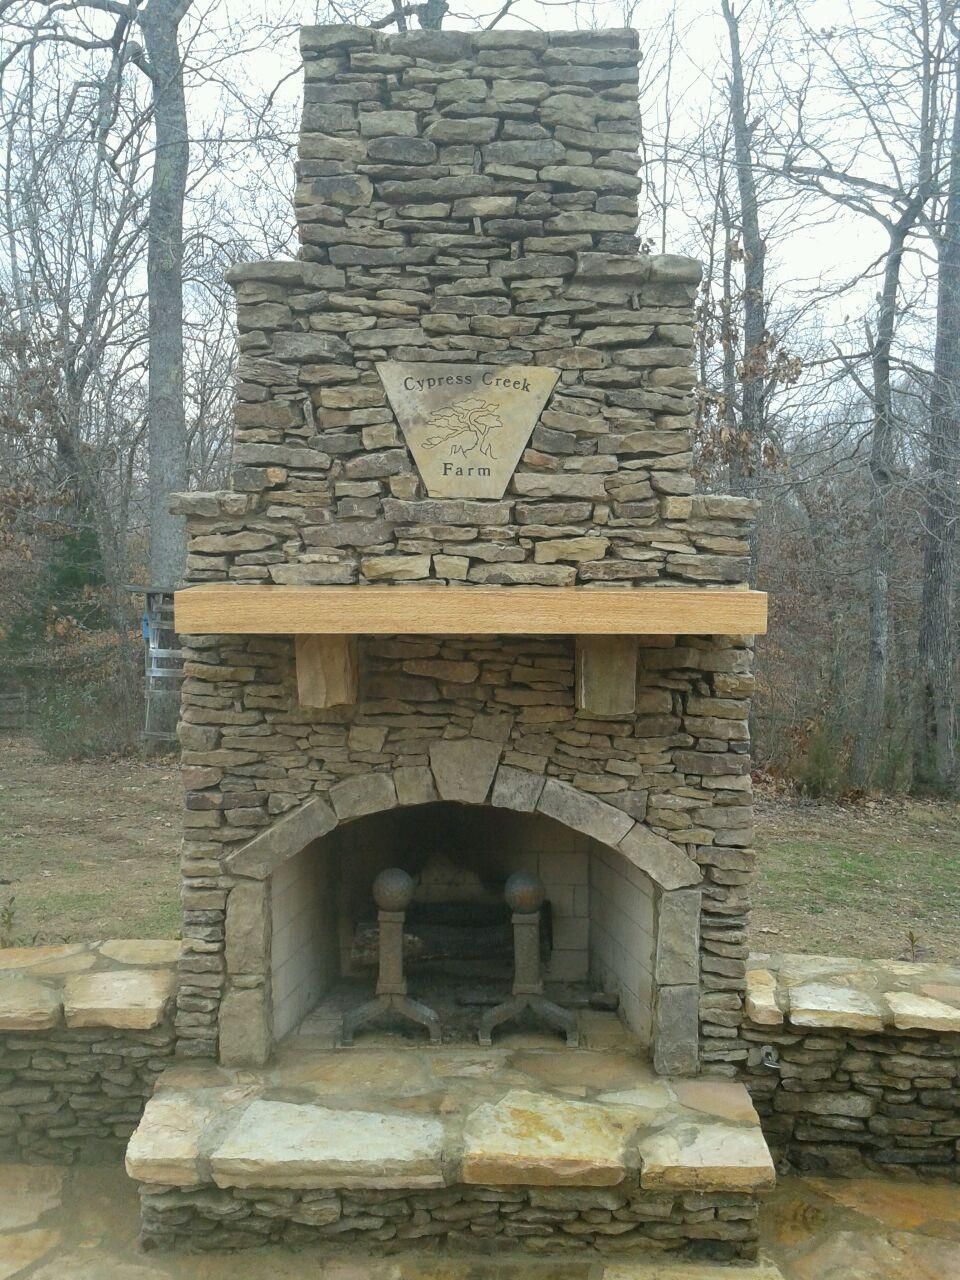 Fireplaces Birmingham Unique Fireplace with Cypress Wood Mantle and Custom Stone Plaque